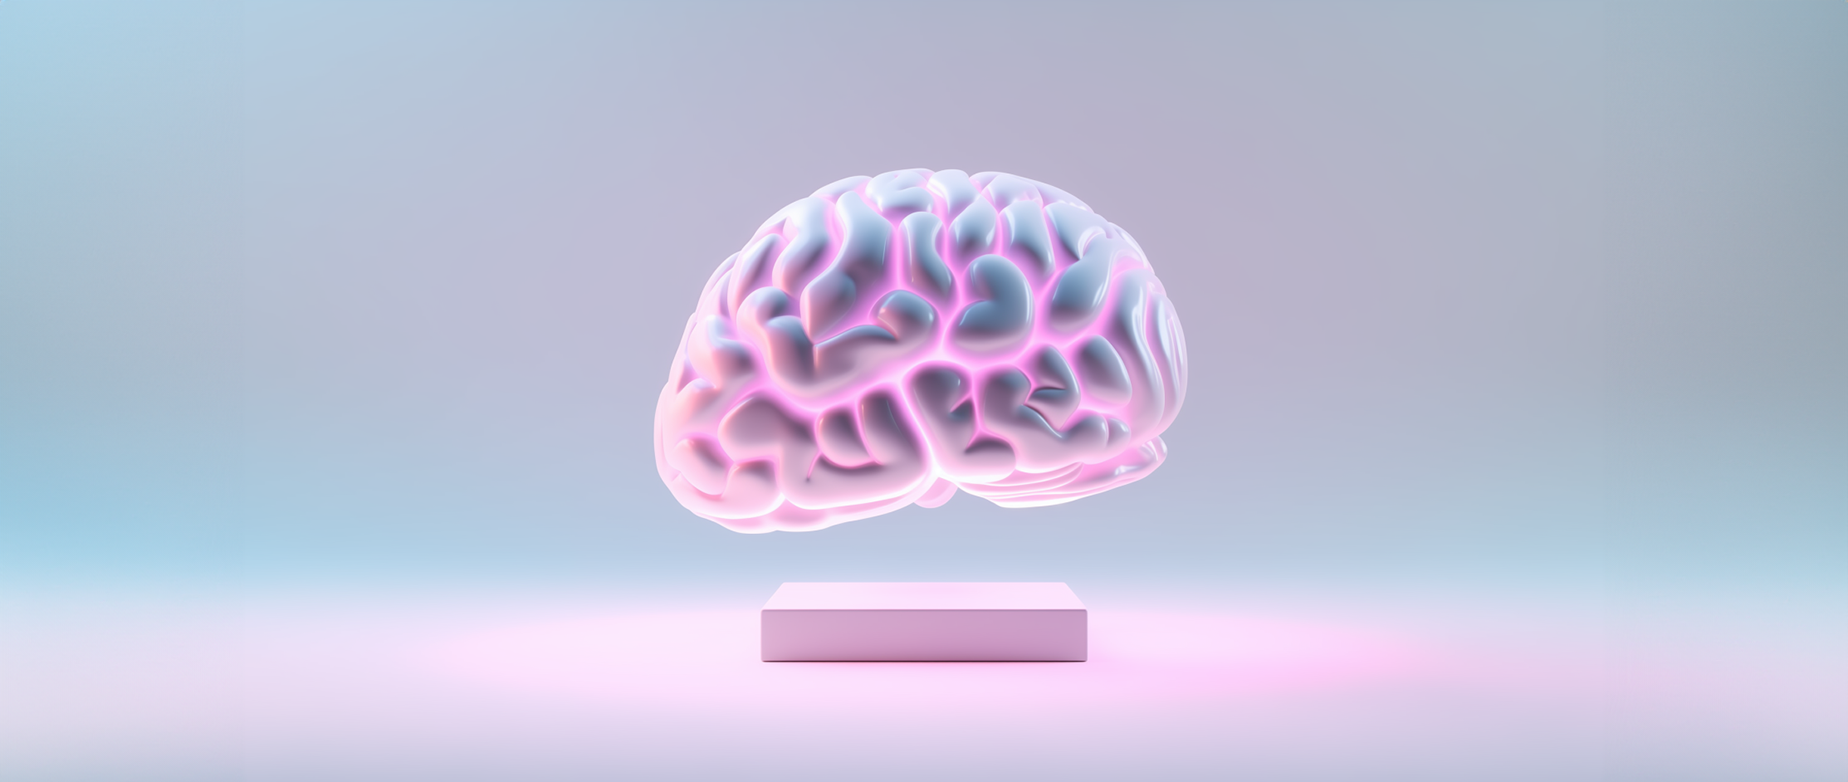 Brain on display illuminated by a pink light: machine learning in ecommerce